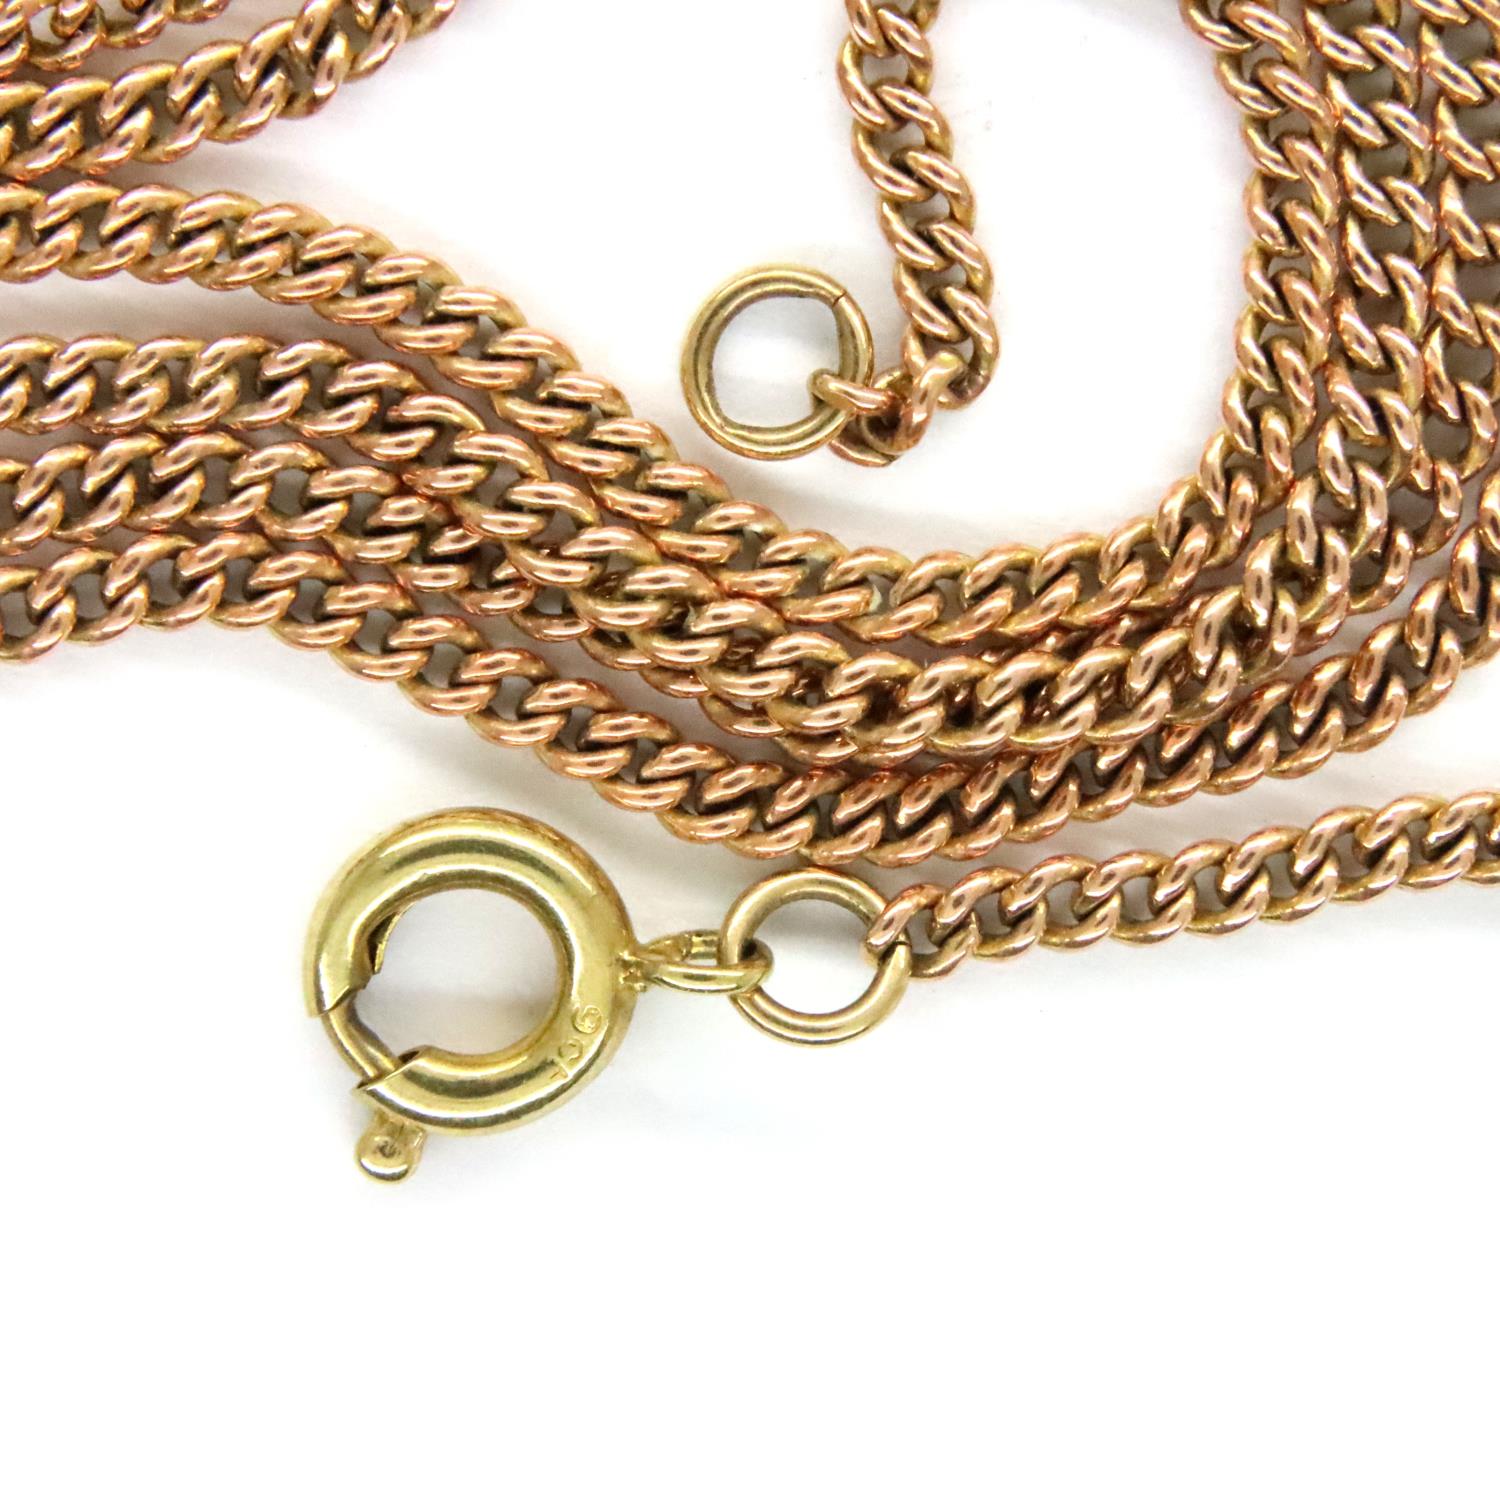 9ct rose gold neck chain, L: 45 cm, 4.0g. P&P Group 1 (£14+VAT for the first lot and £1+VAT for - Image 2 of 2